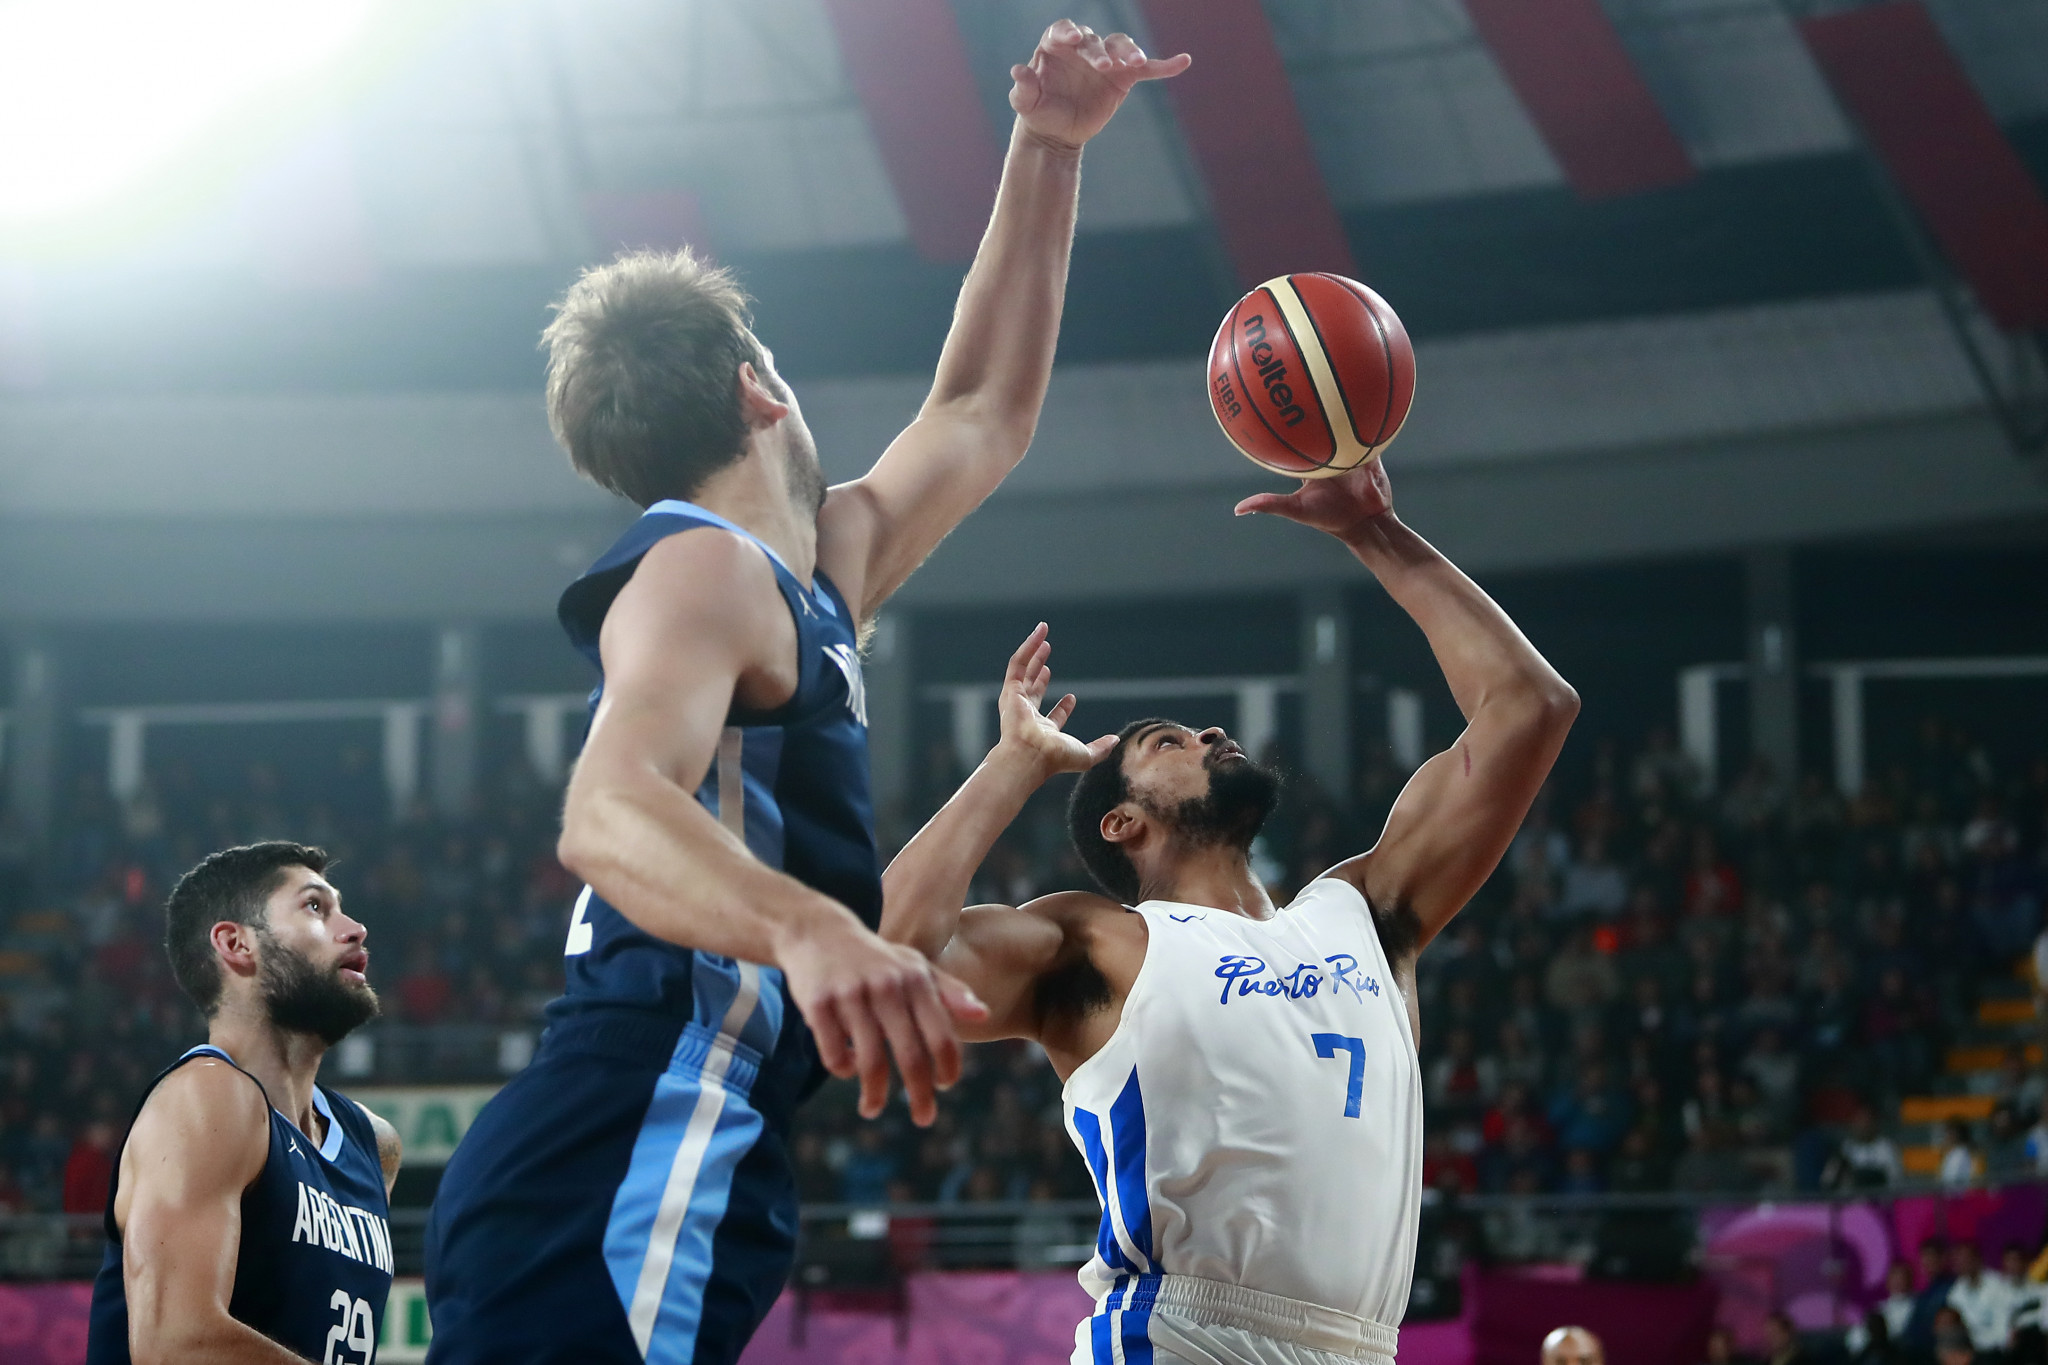 Argentina defeat Puerto Rico to claim Lima 2019 men's basketball gold 